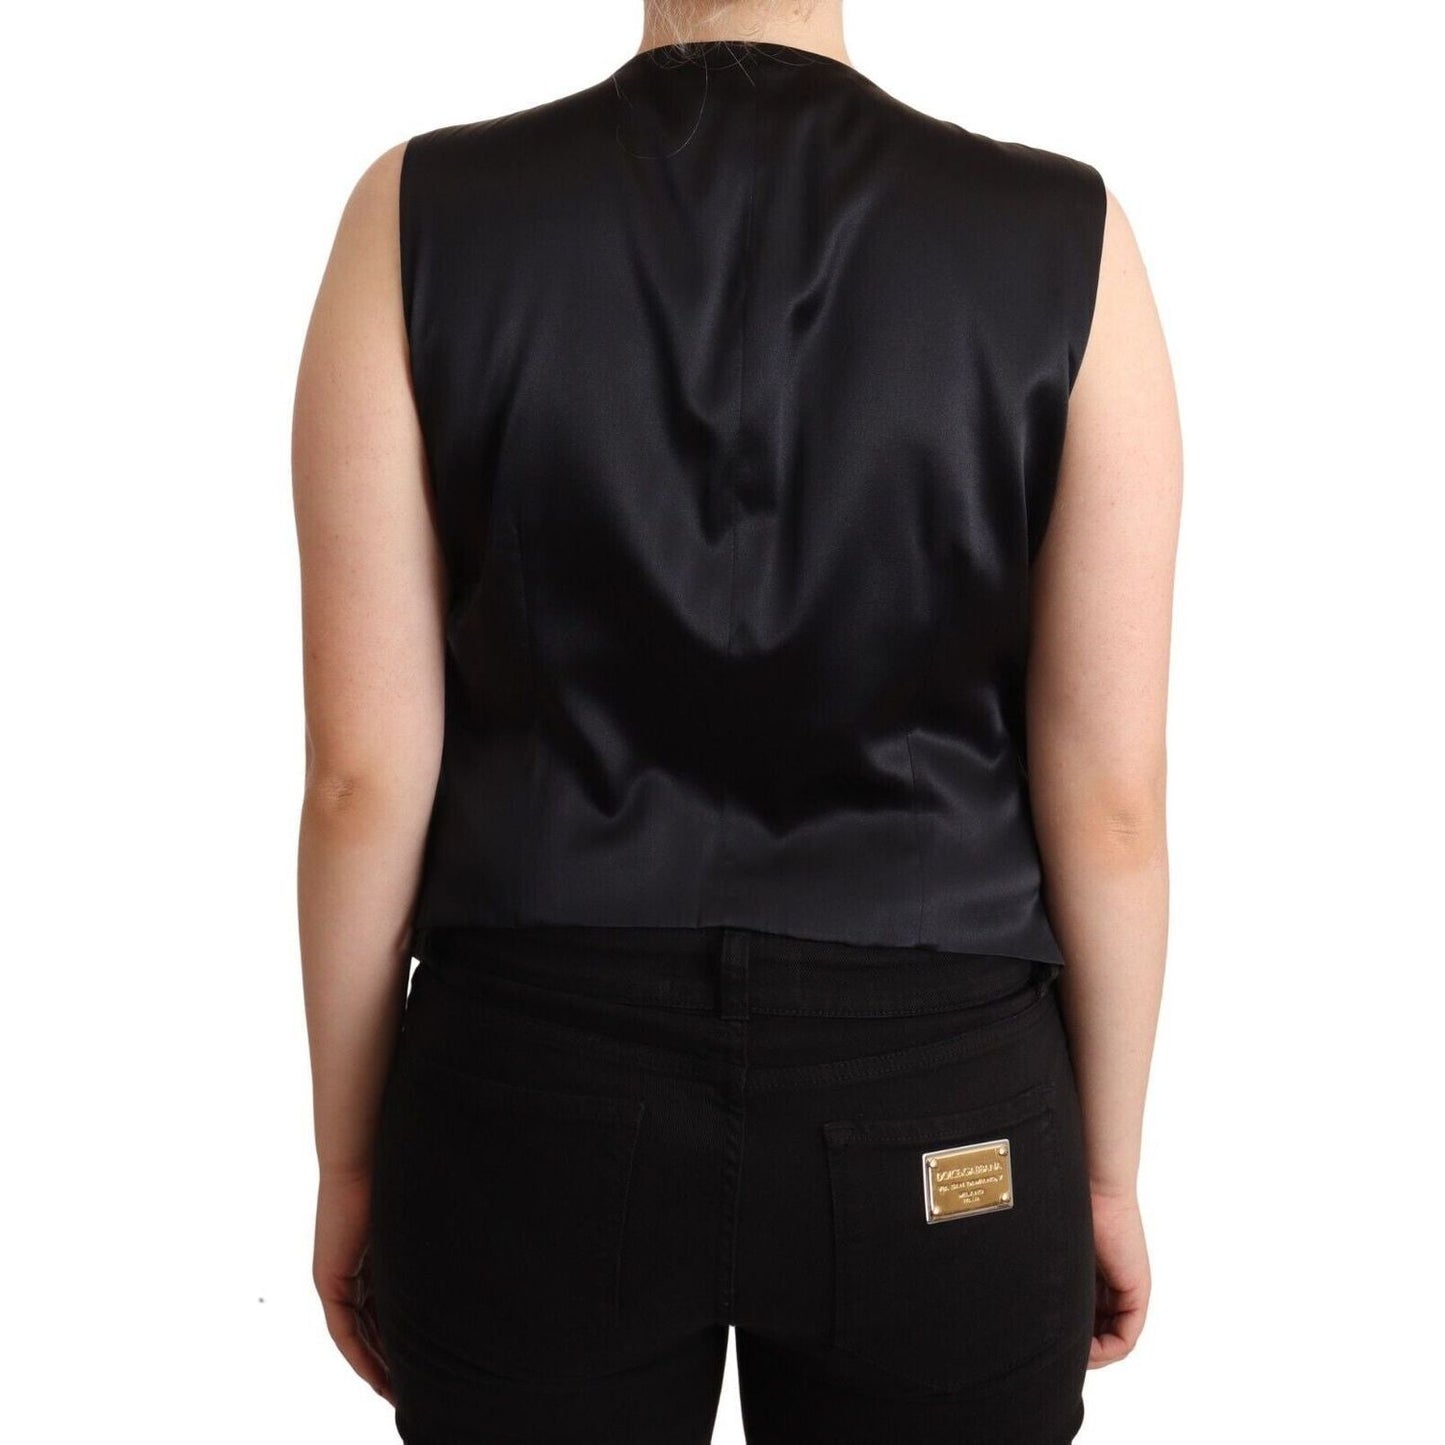 Dolce & Gabbana Chic Buttoned Black Waistcoat WOMAN TOPS AND SHIRTS black-button-down-sleeveless-vest-waiscoat-top